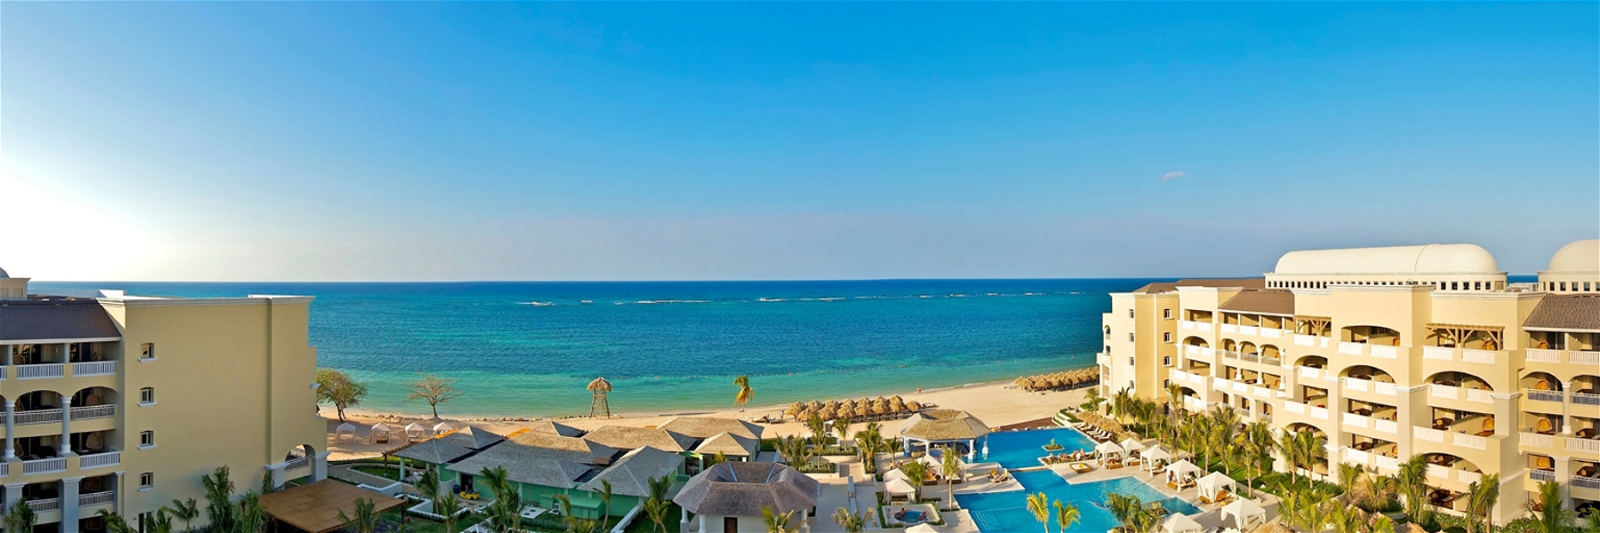 Golf Vacation Package - Iberostar Grand Rose Hall - Luxury All-Inclusive from $457 per day!